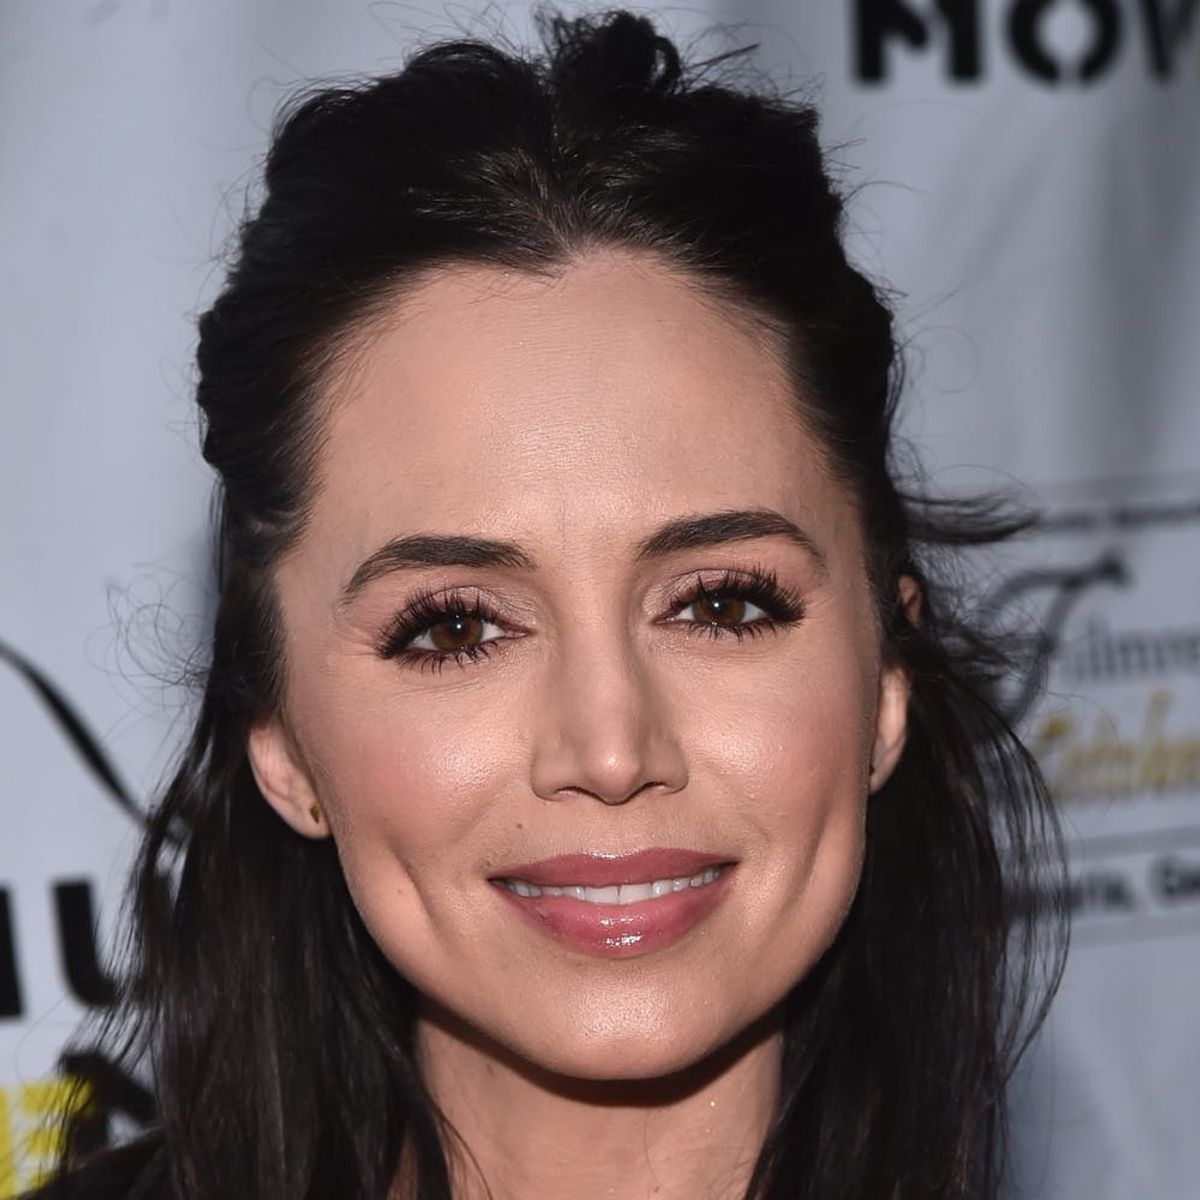 Eliza Dushku Says She Was Sexually Assaulted on the Set of ‘True Lies’ at Age 12